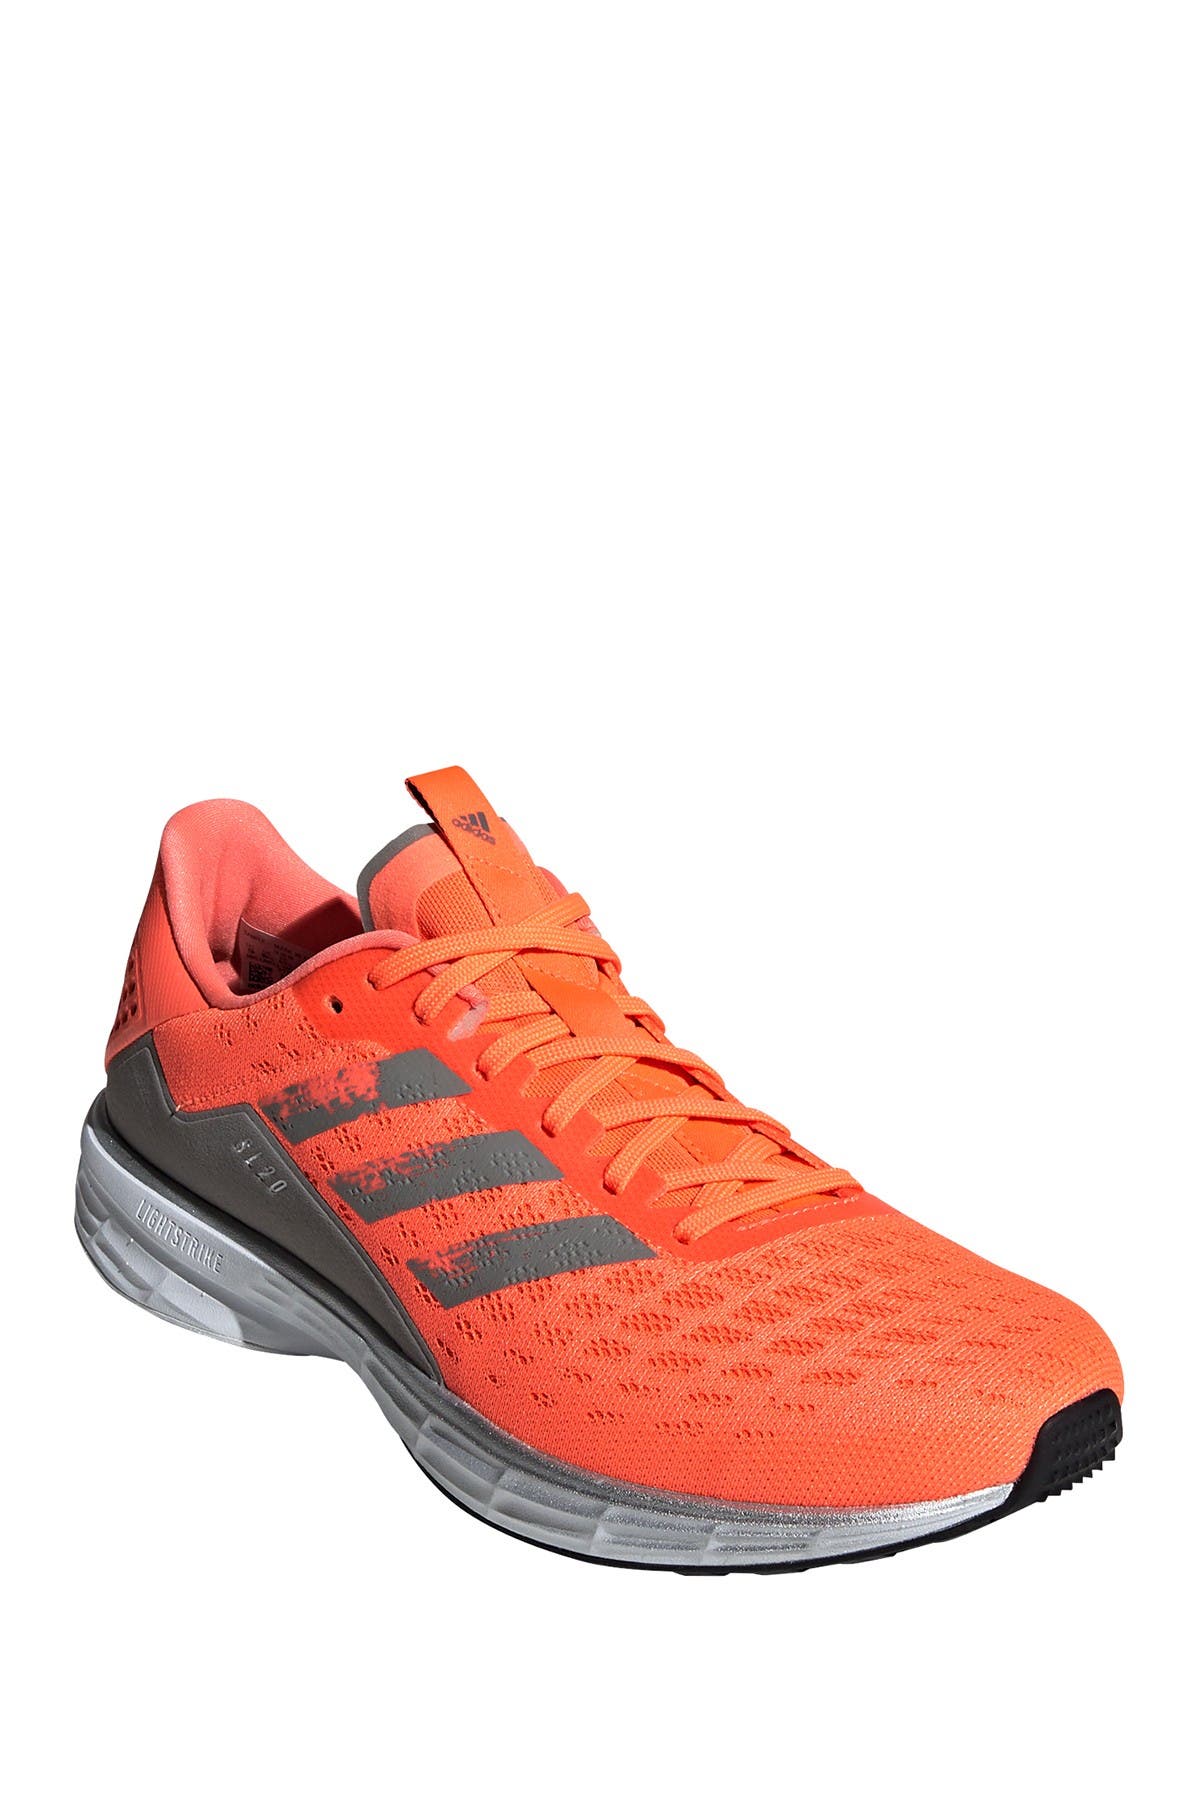 sl20 running shoes